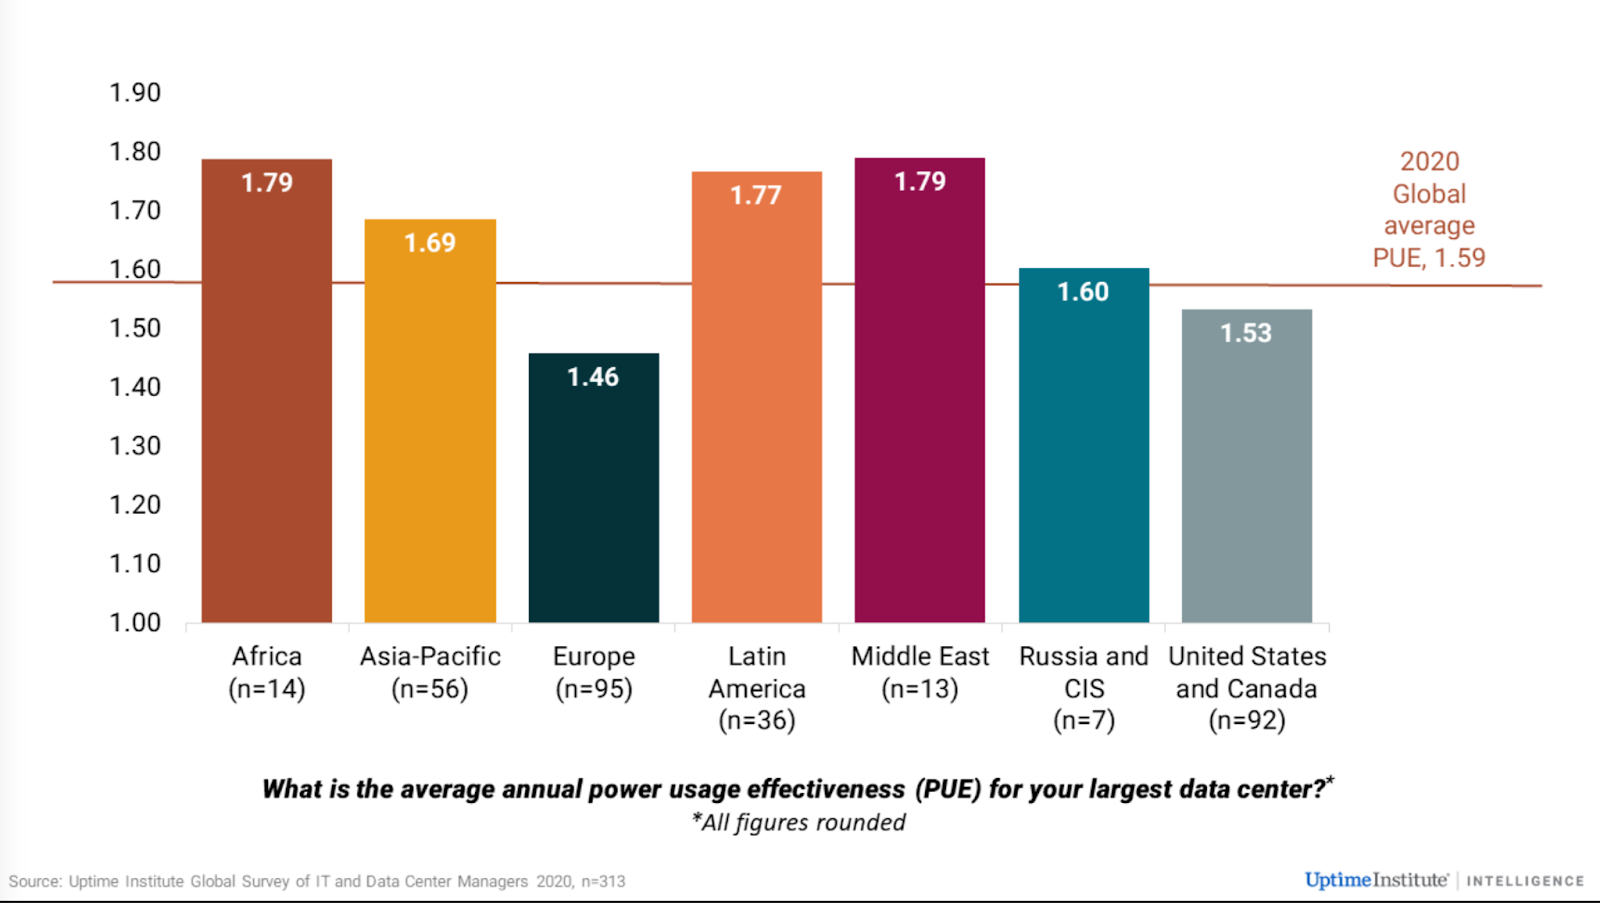 Bar chart depicting average annual power usage effectiveness of largest data centres in different regions